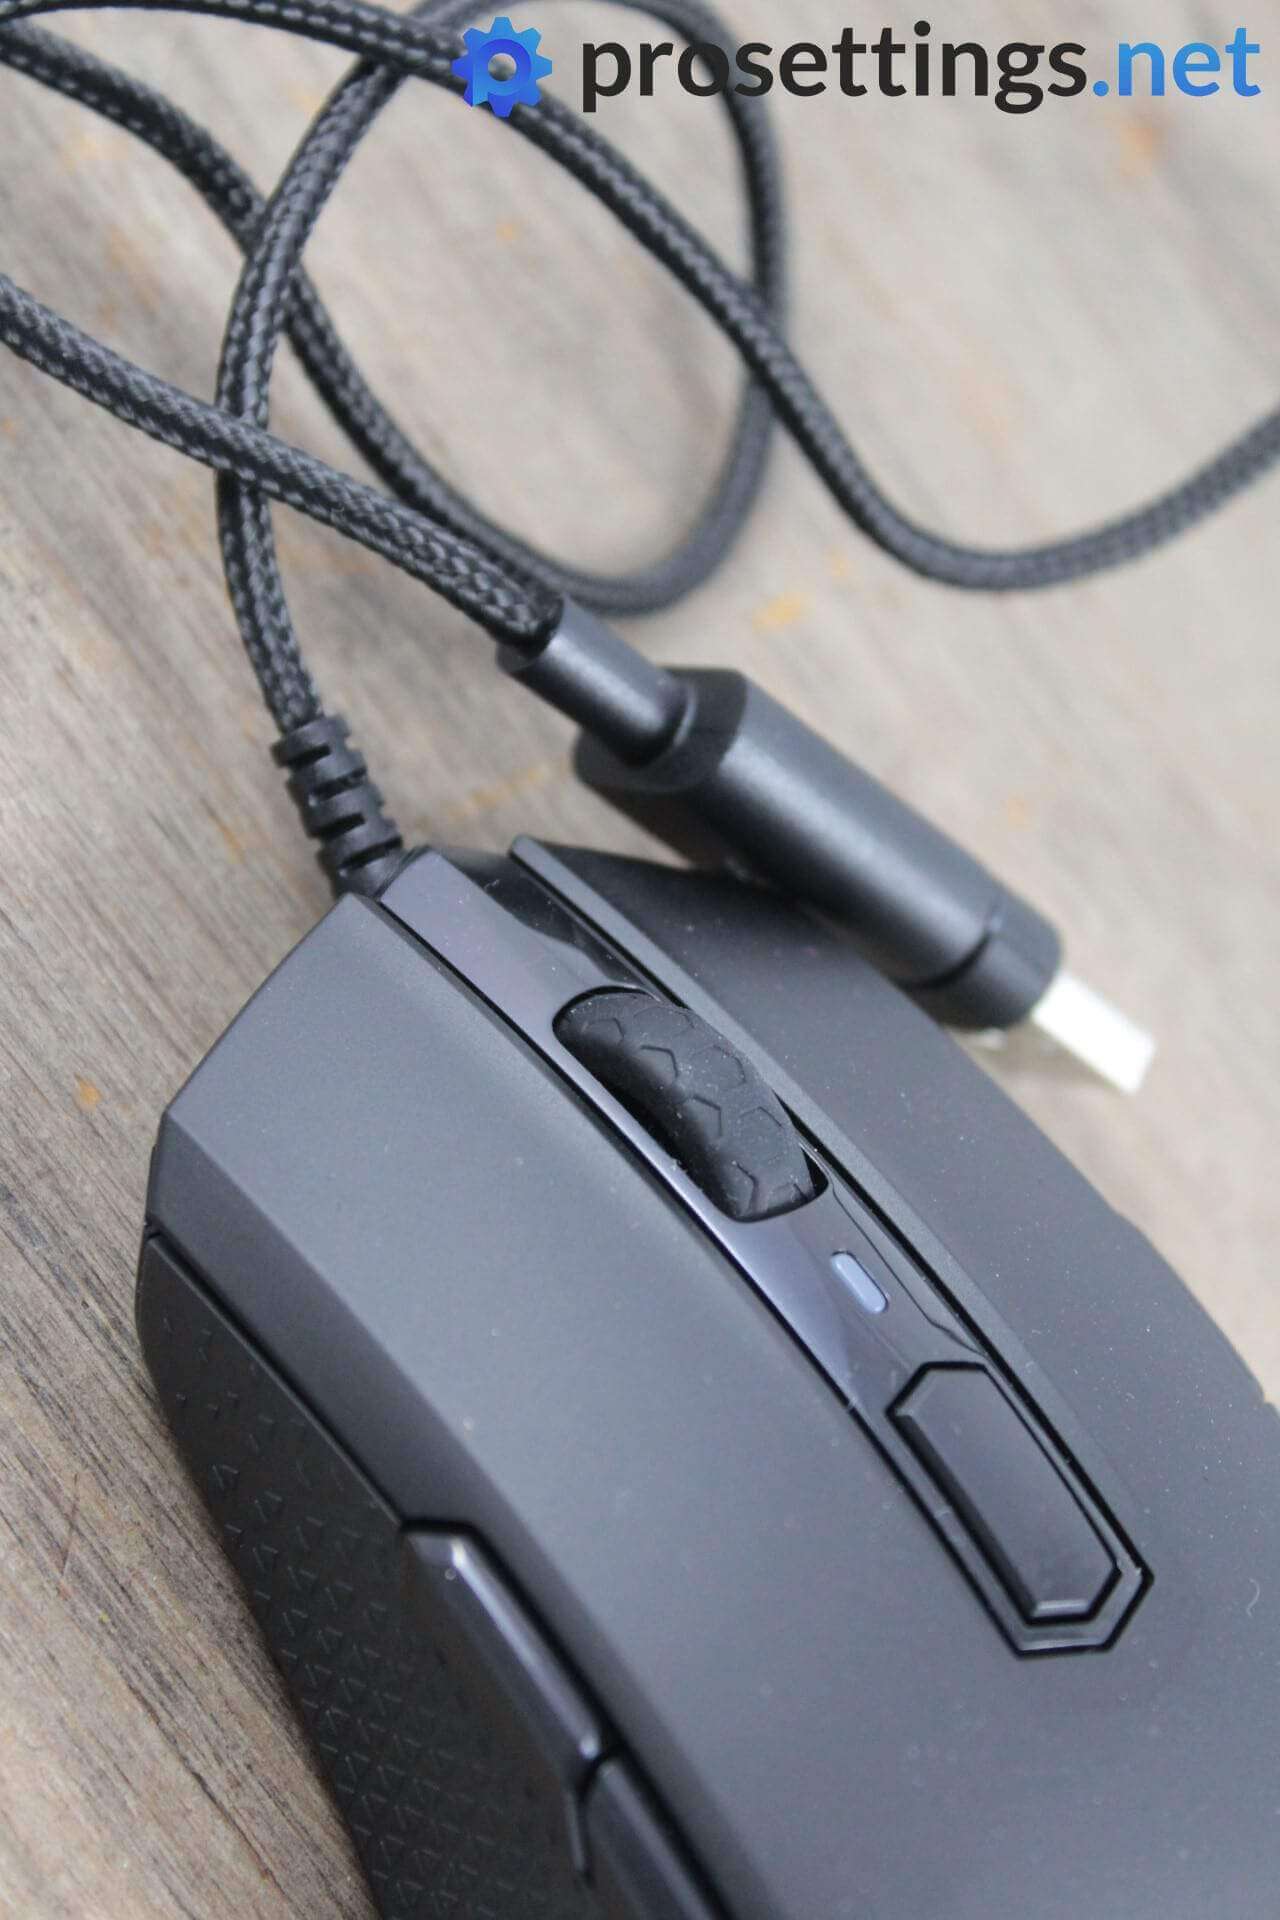 Corsair M55 RGB Pro Mouse Review cable and quality